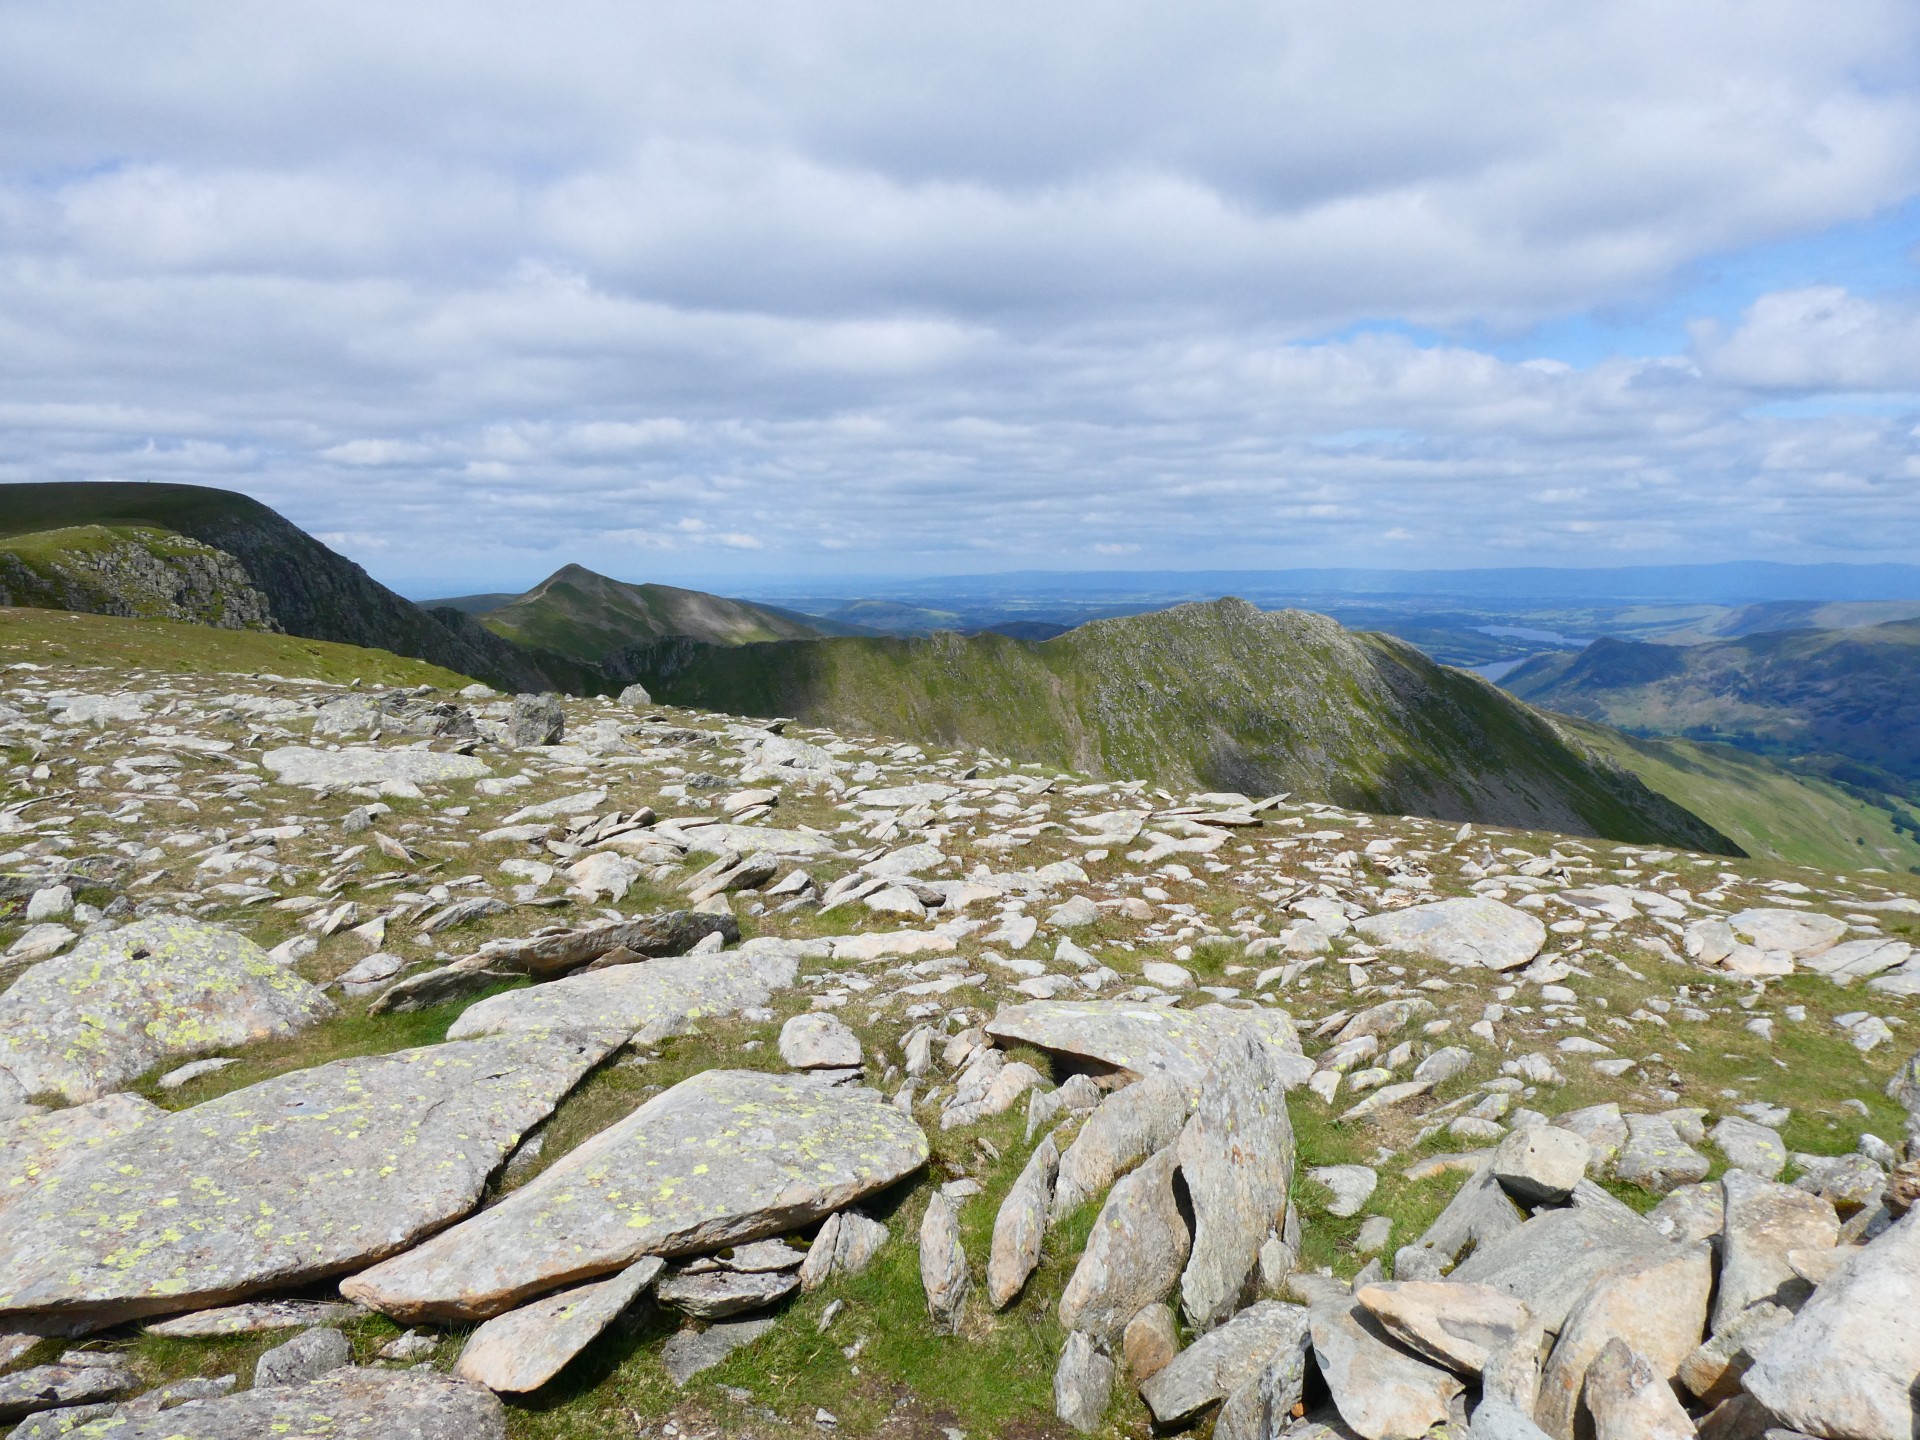 On Nethermost Pike